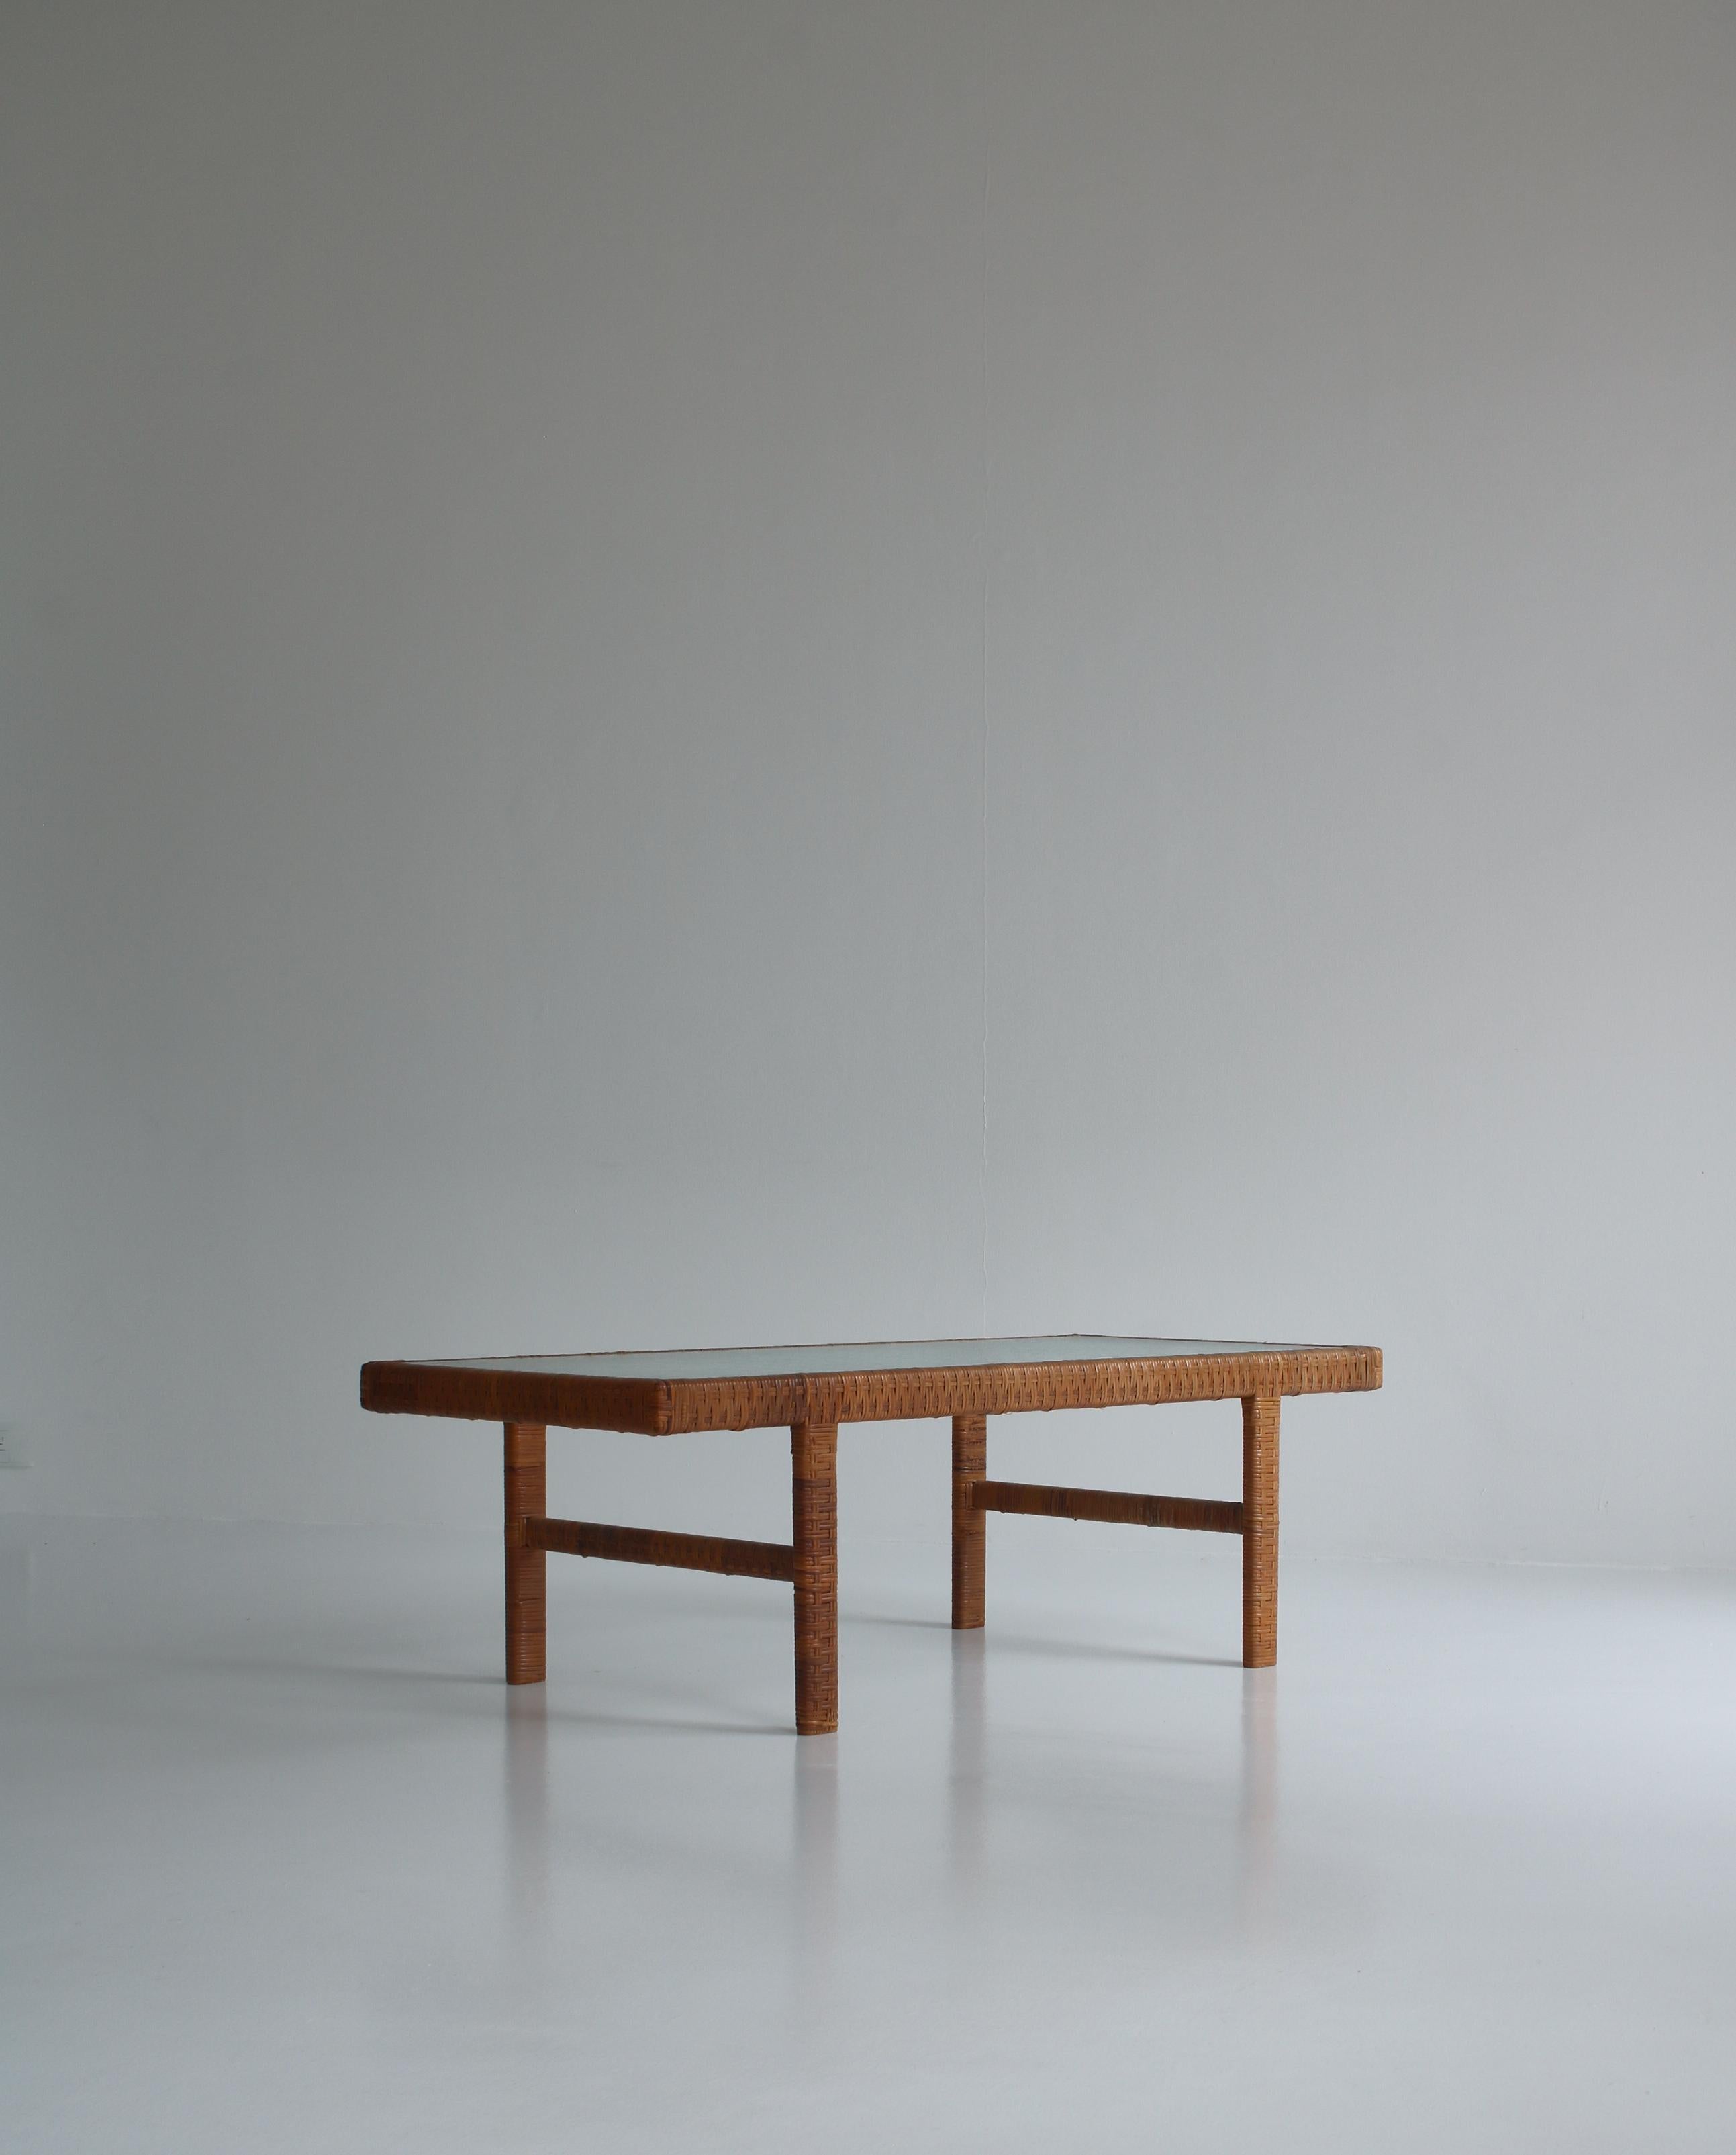 Danish Modern Coffee Table by R. Wengler in Rattan Cane and Matt Glass, 1940s For Sale 1